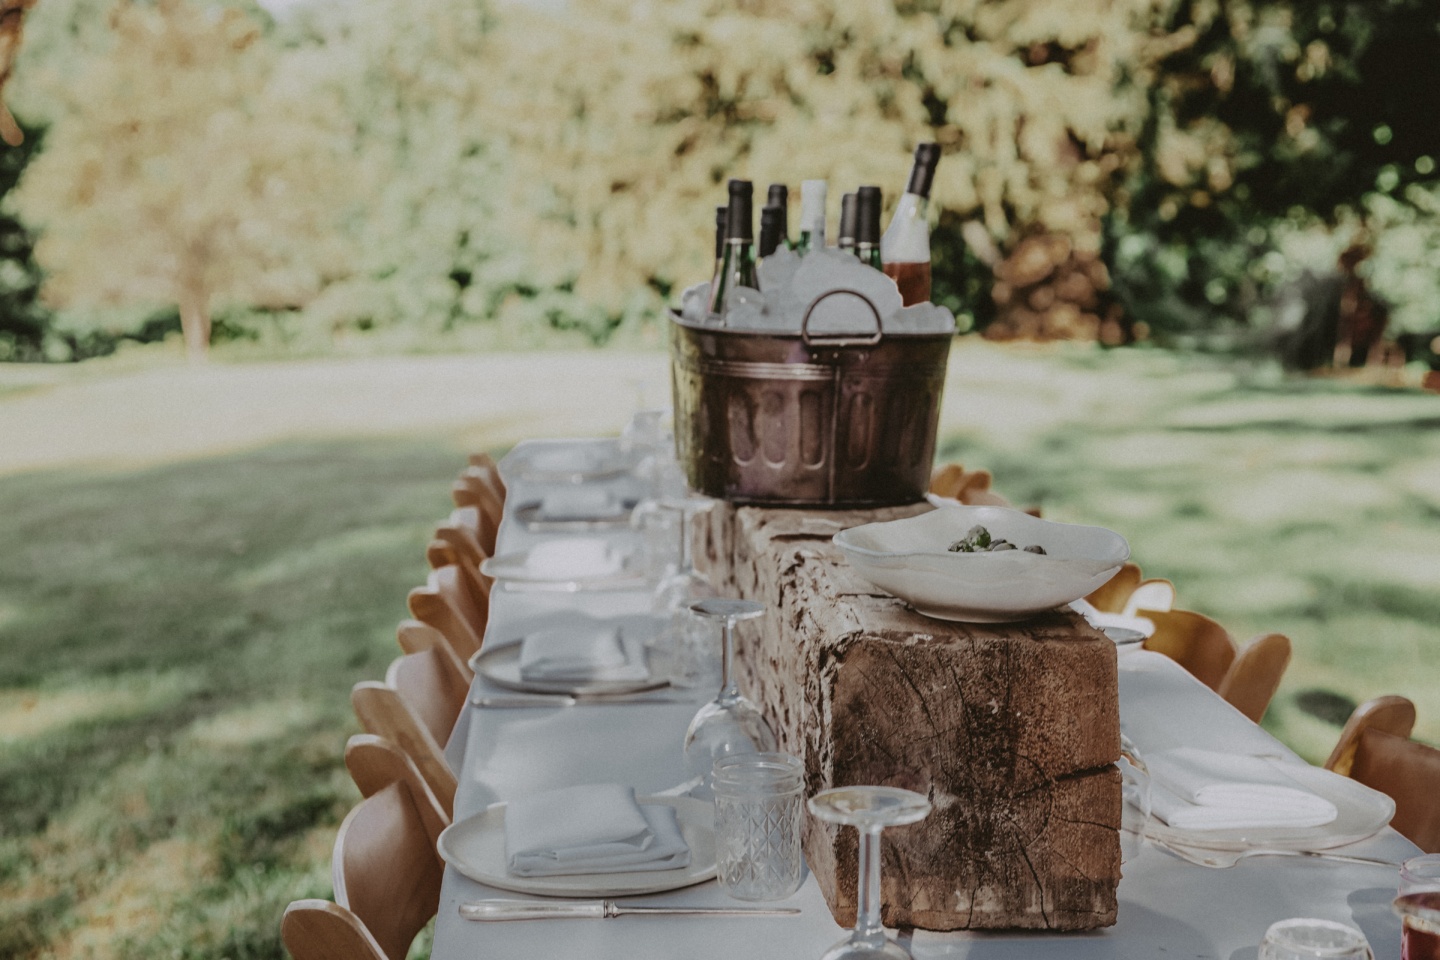 Table - Outside Dining - Decor - Table Setting - Event - Westchester New York #dining #event #decor #outdoor #dining #backyard #table #tablescape